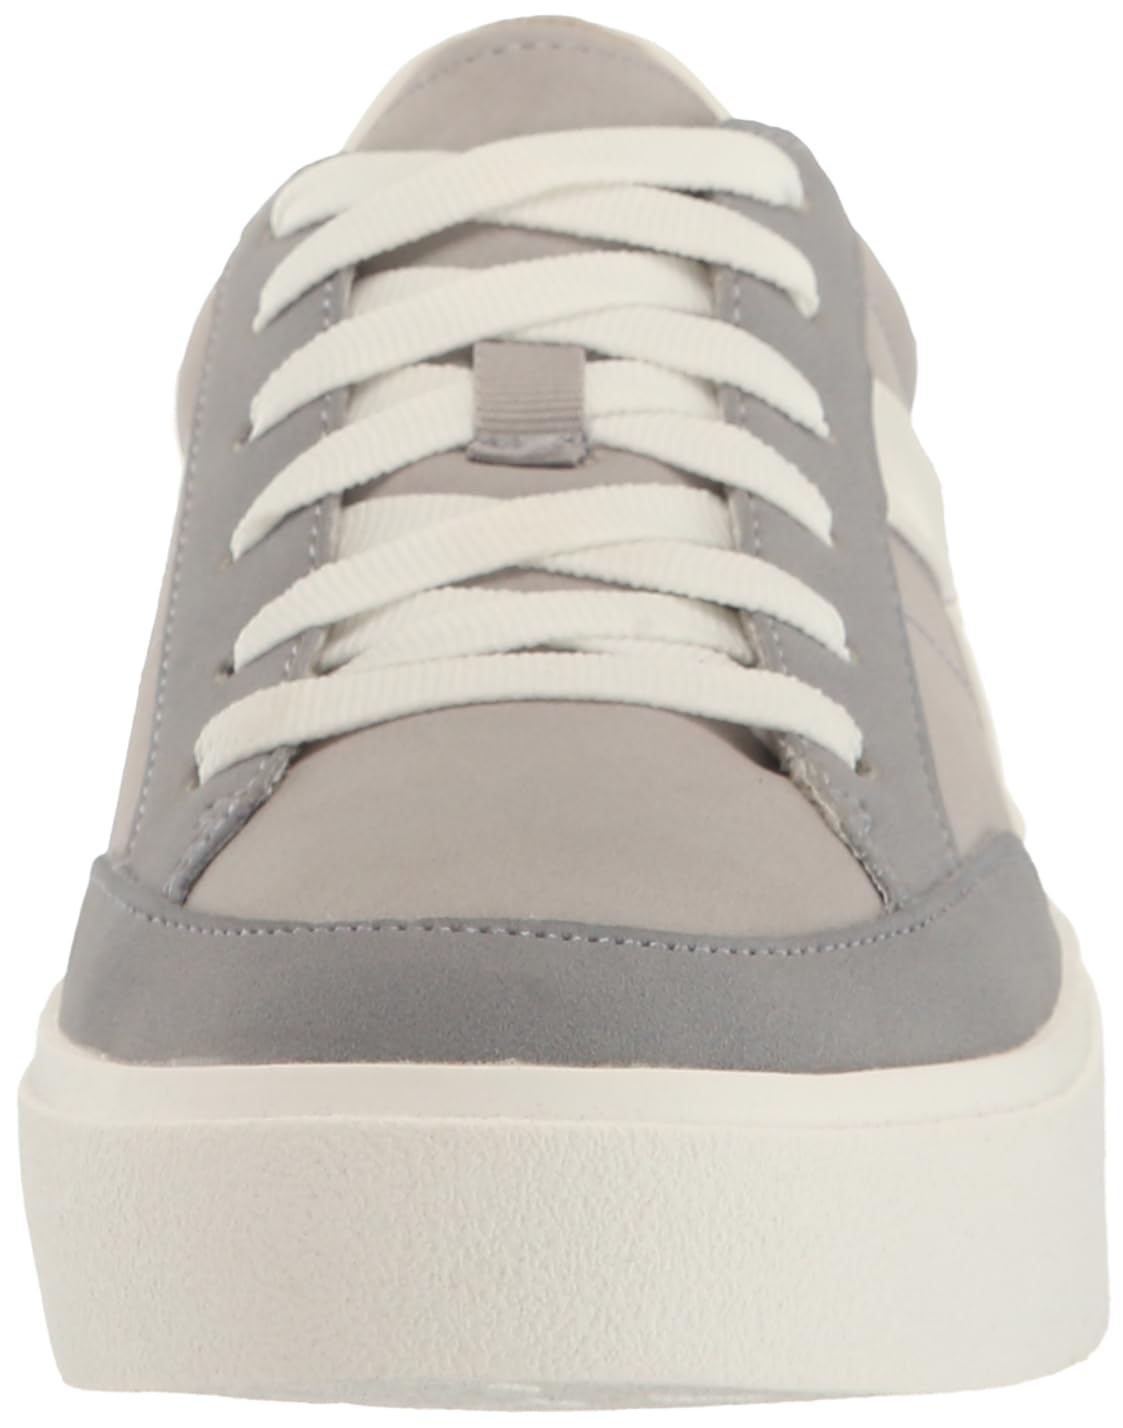 Dr. Scholl's Shoes Women's Madison Lace Sneaker Oxford